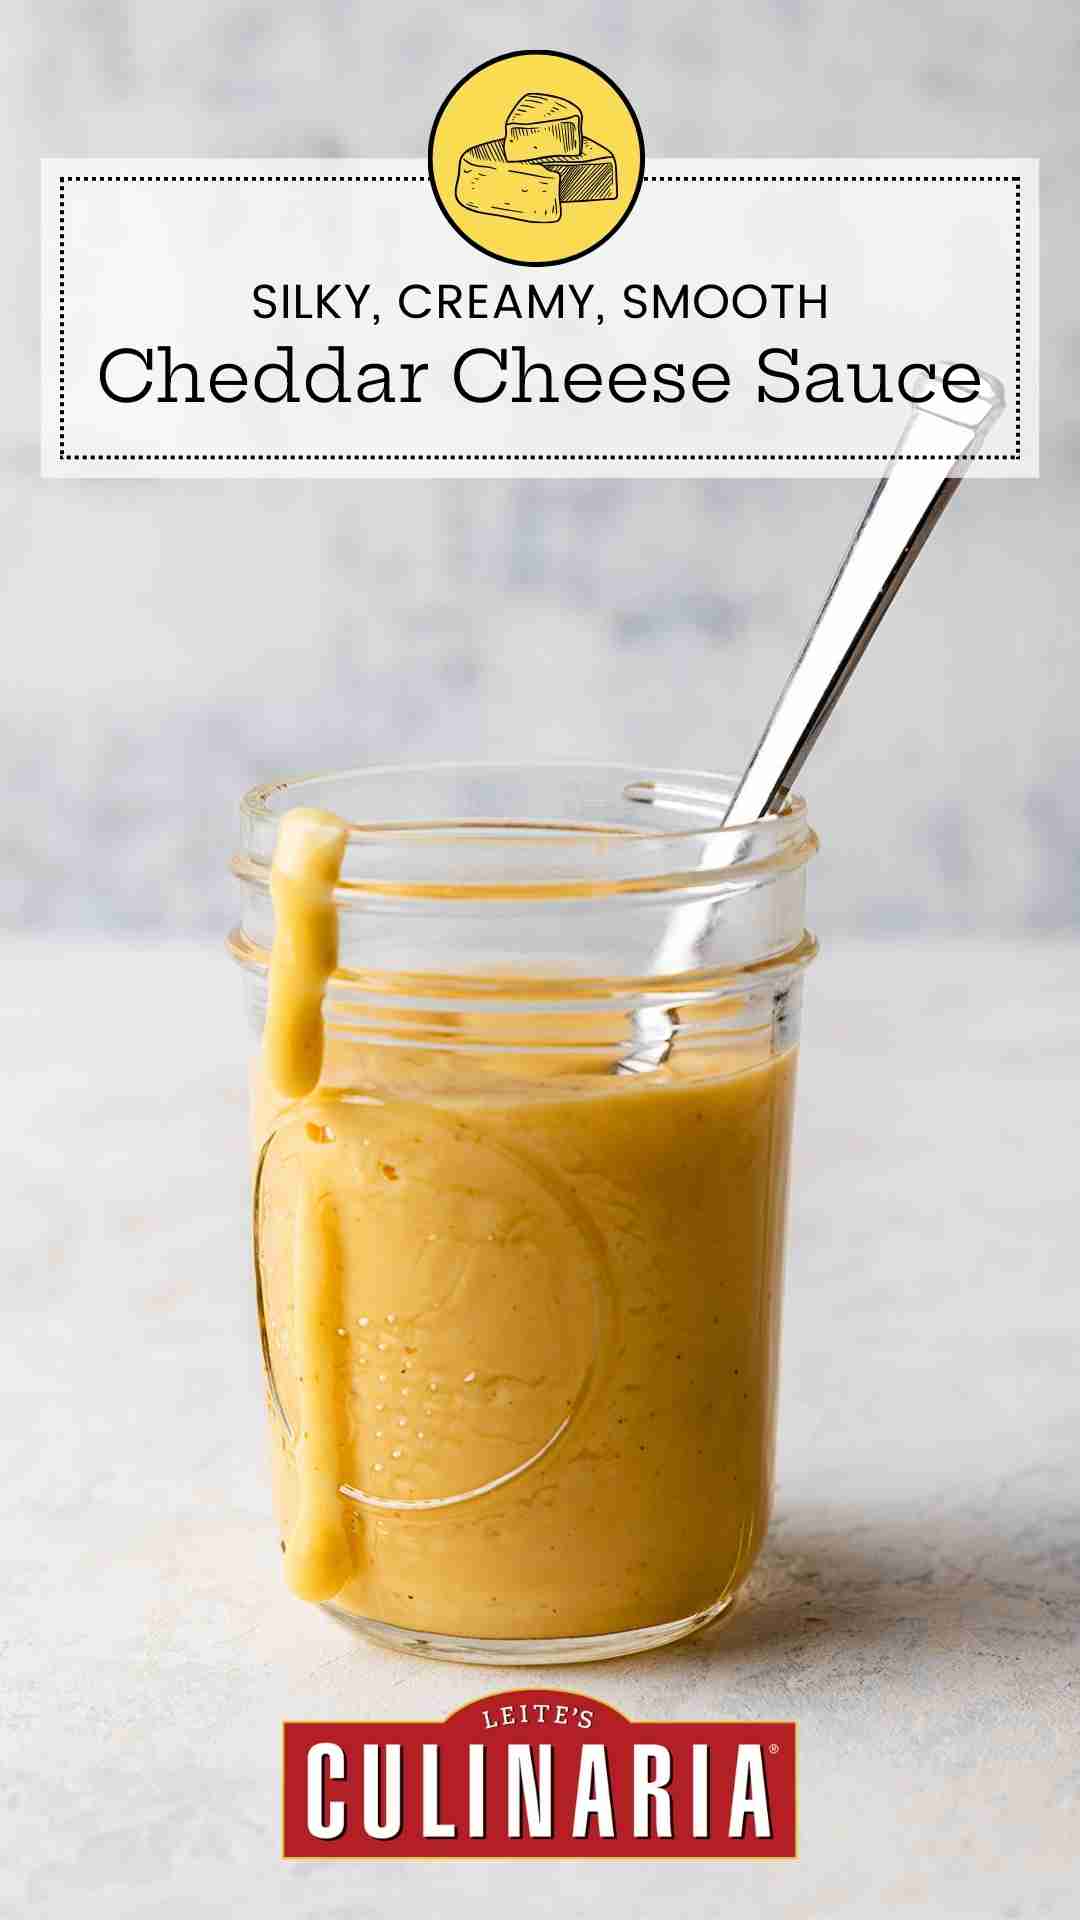 A Mason jar filled with homemade Cheddar cheese sauce with a spoon resting inside and a drip of sauce down the side of the jar.